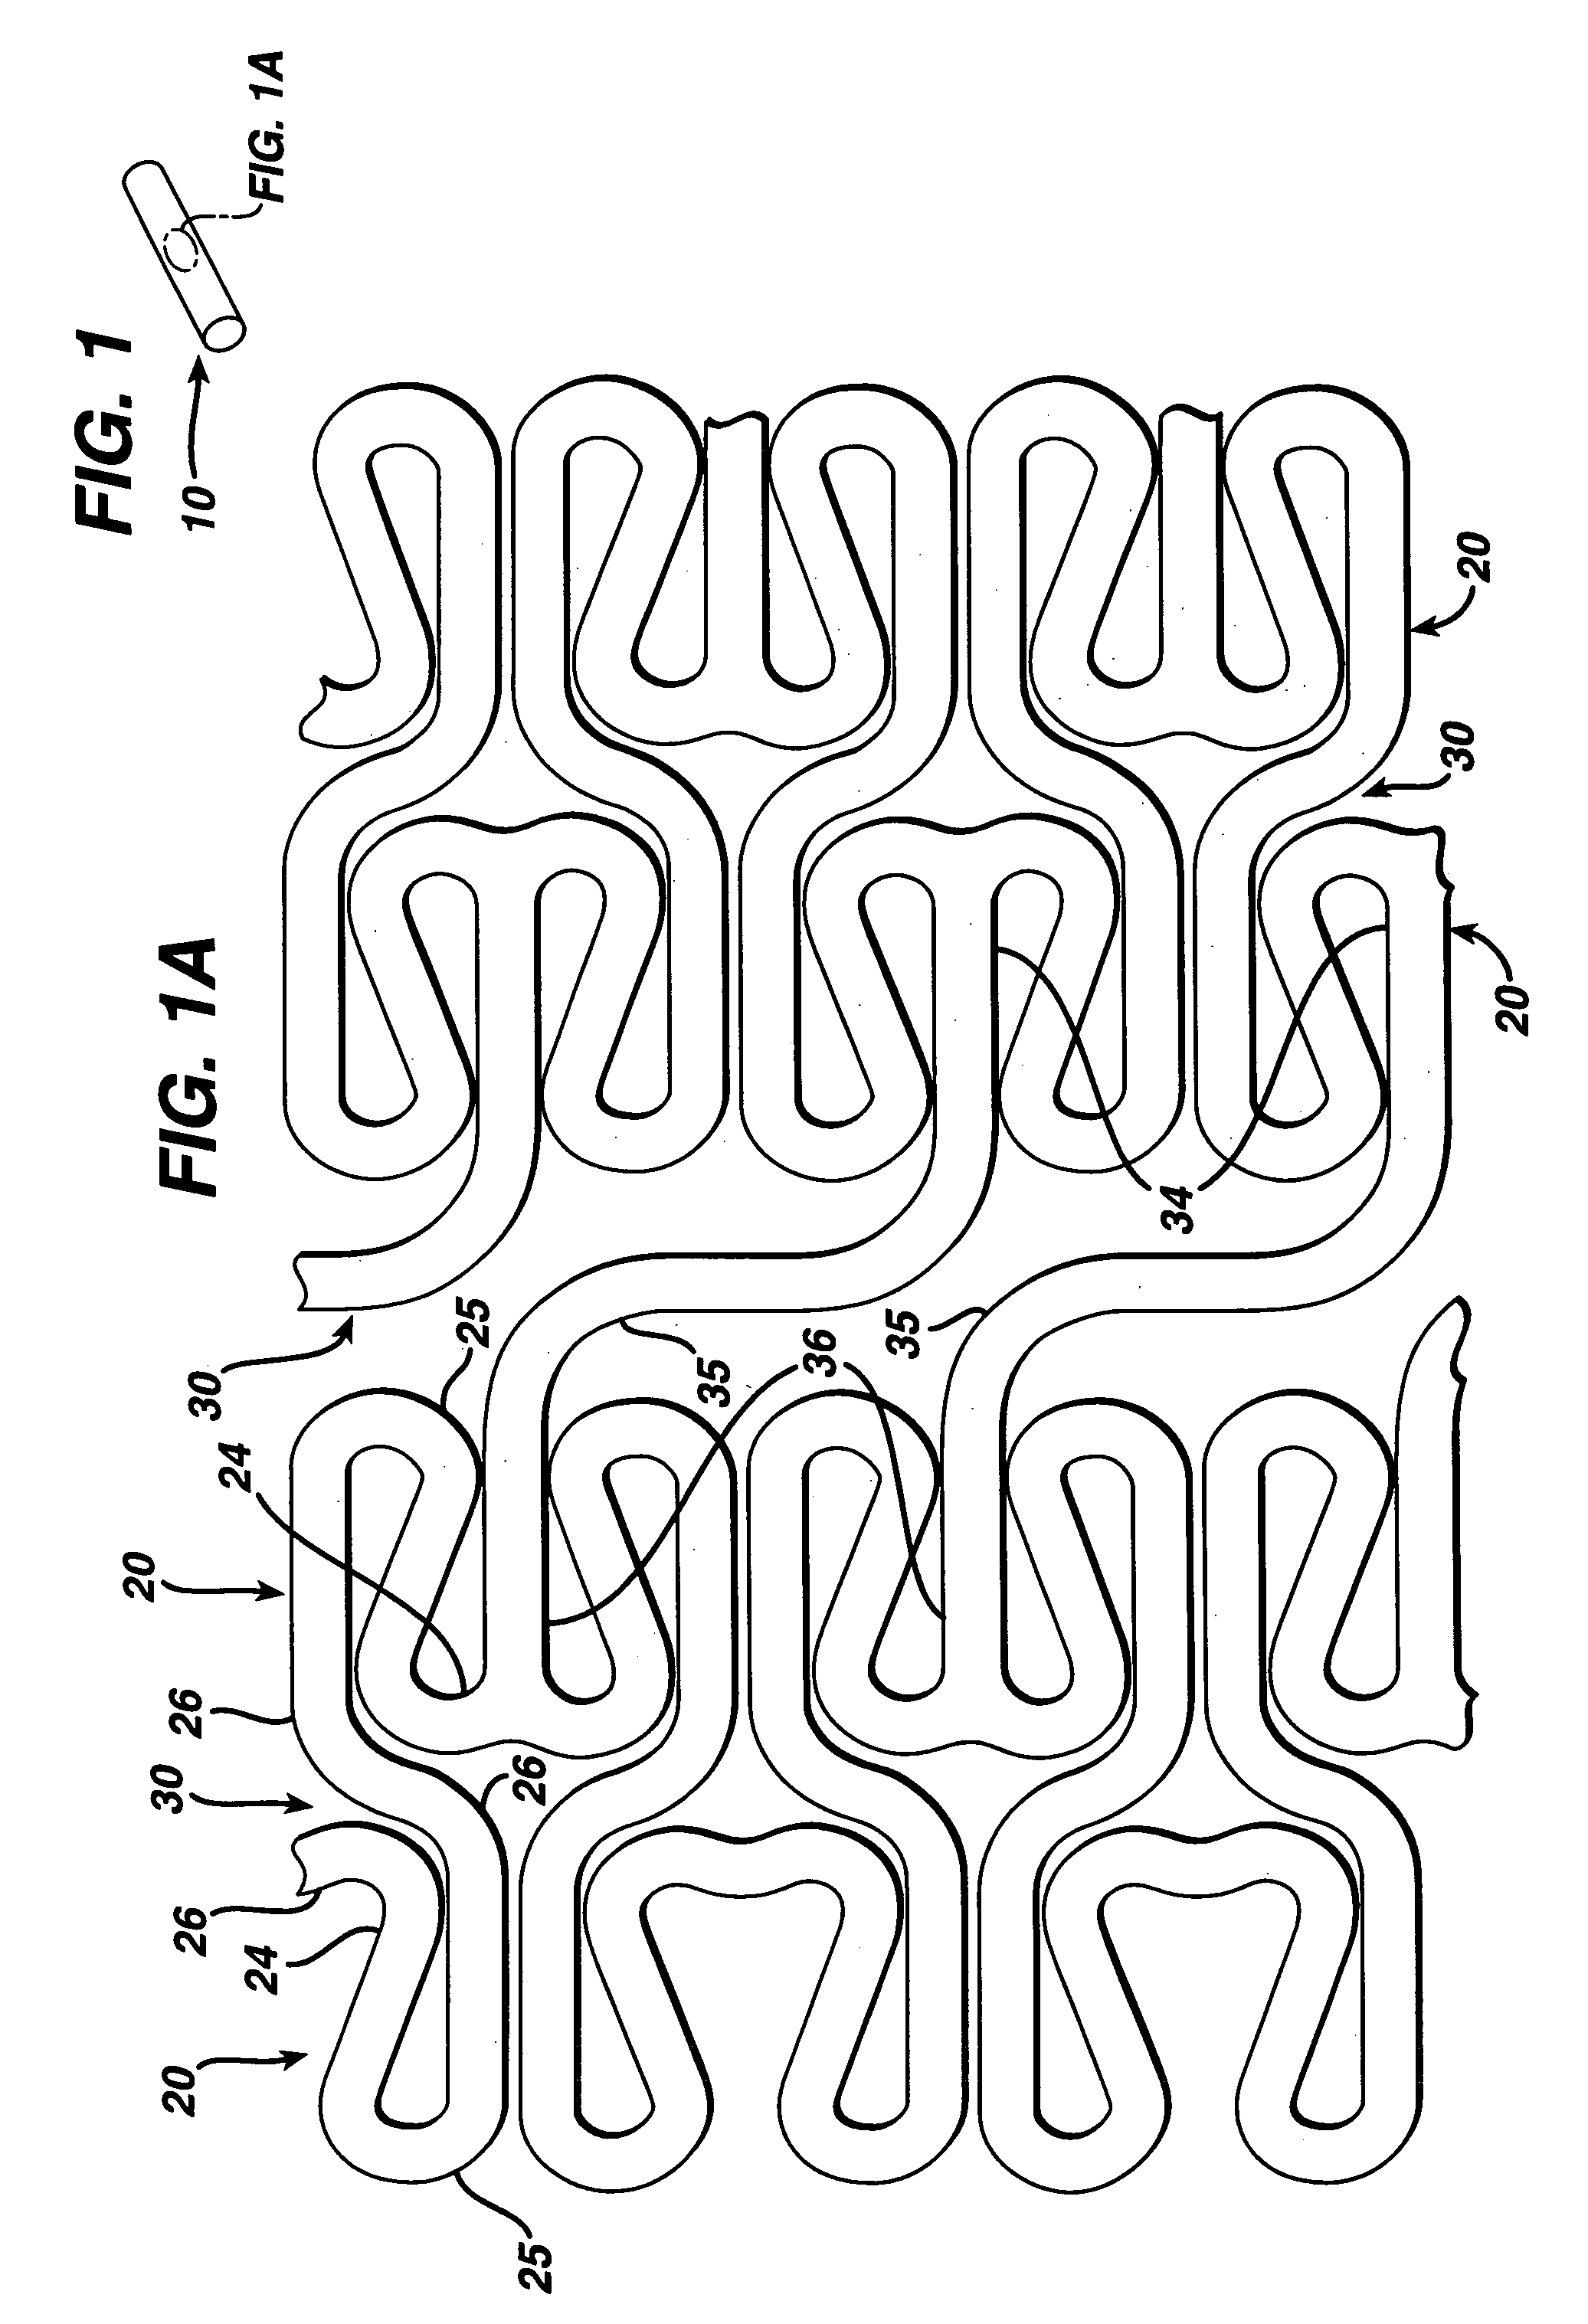 Flexible stent and method of manufacture